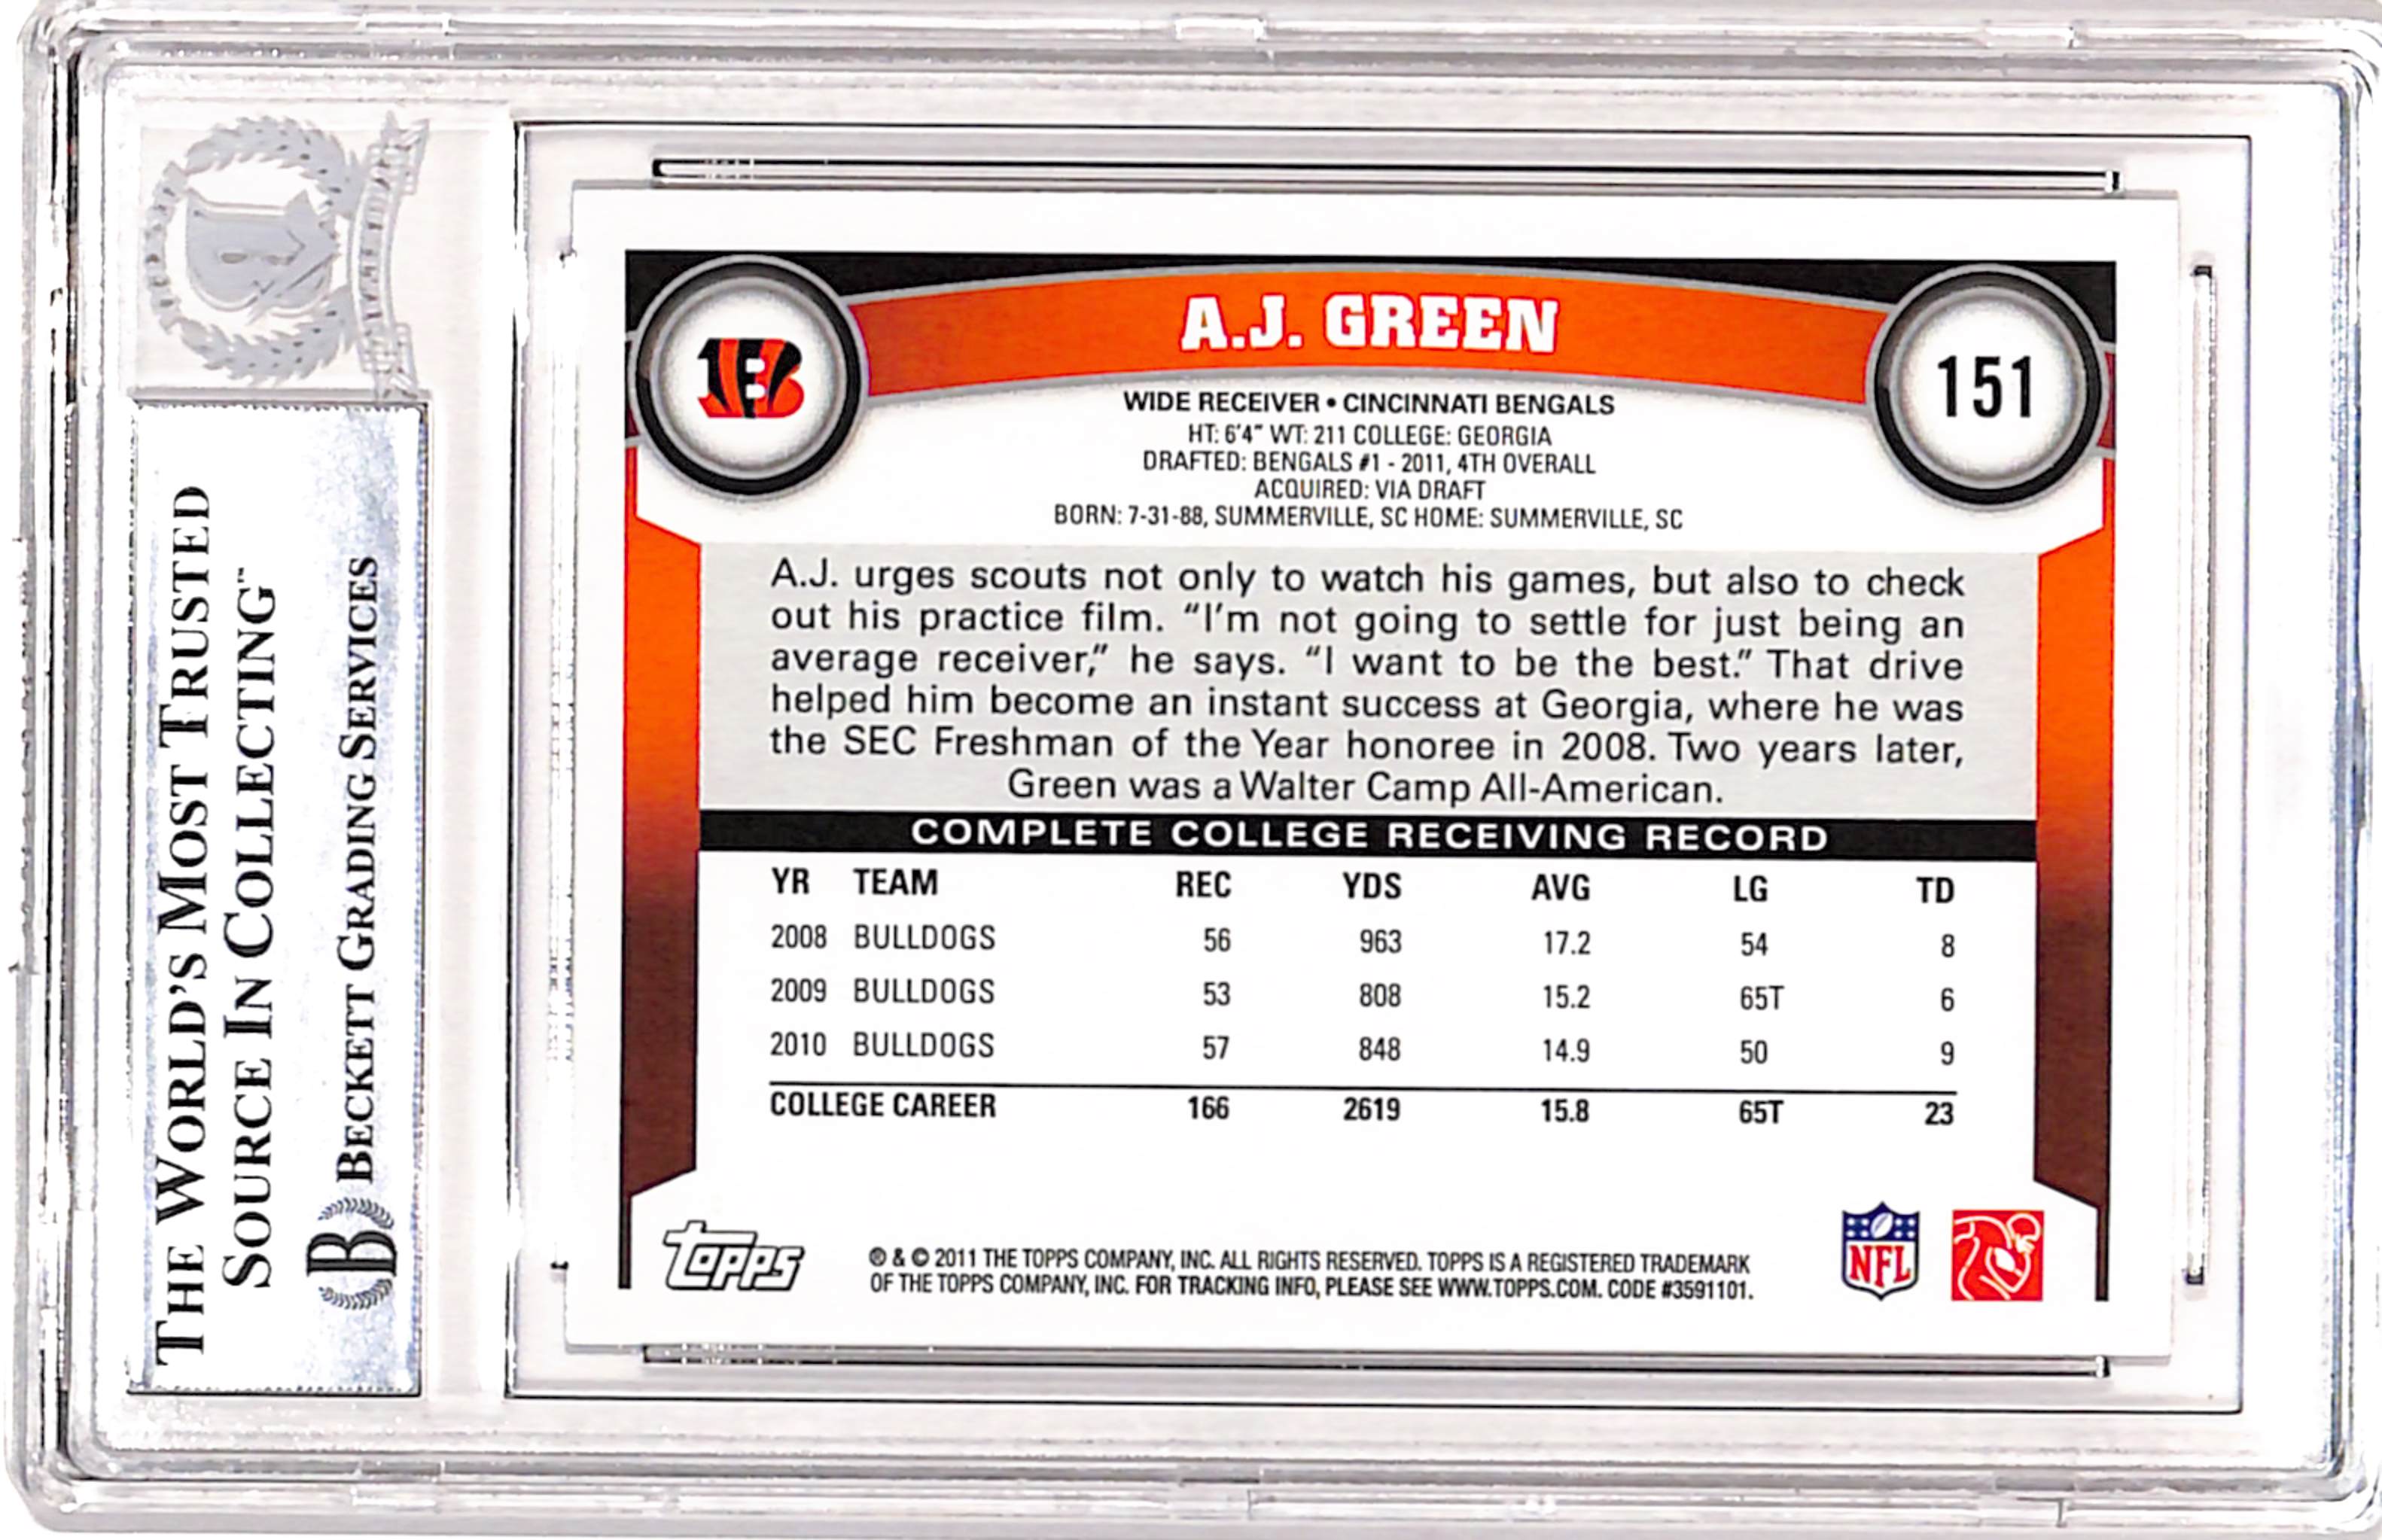 AJ Green Autographed/Signed 2011 Topps #151 Trading Card Beckett